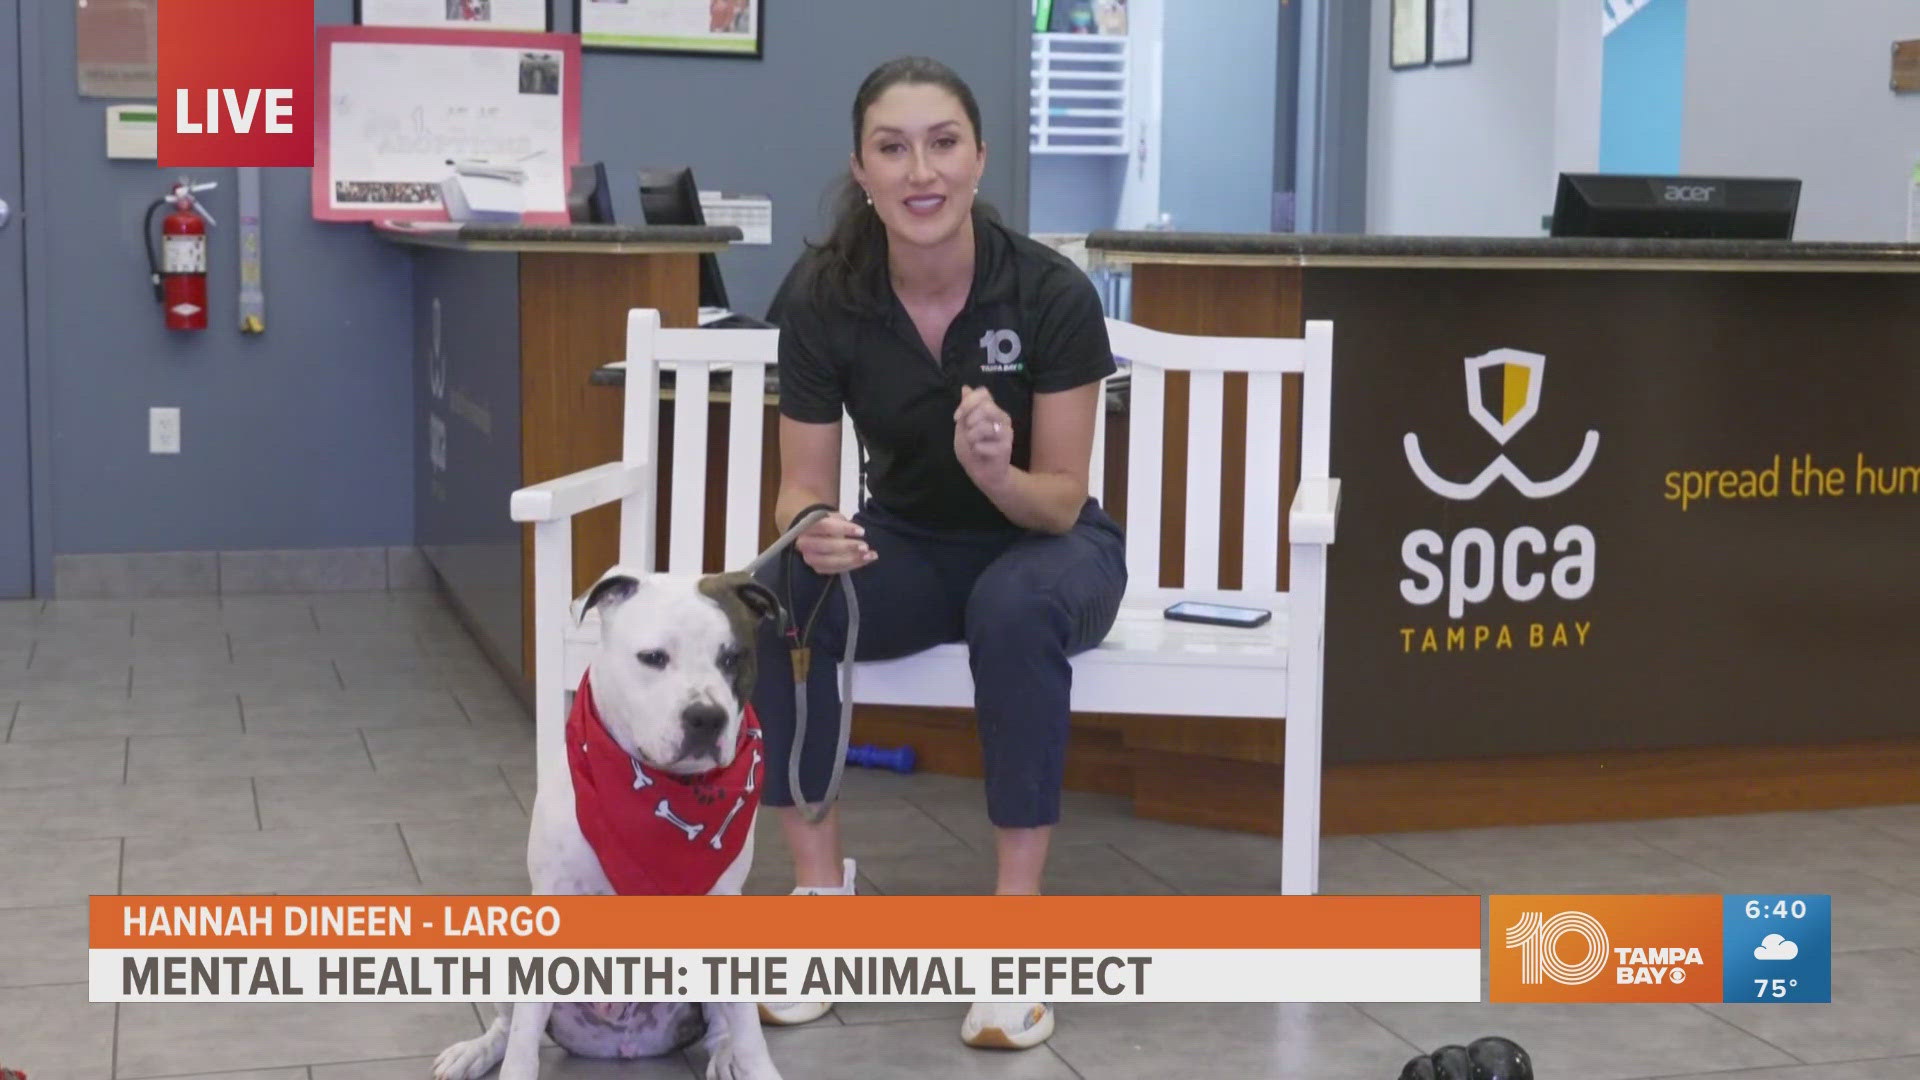 During Mental Health Awareness Month, SPCA Tampa Bay points to the mental health benefits of being around animals, encouraging people to adopt or volunteer.